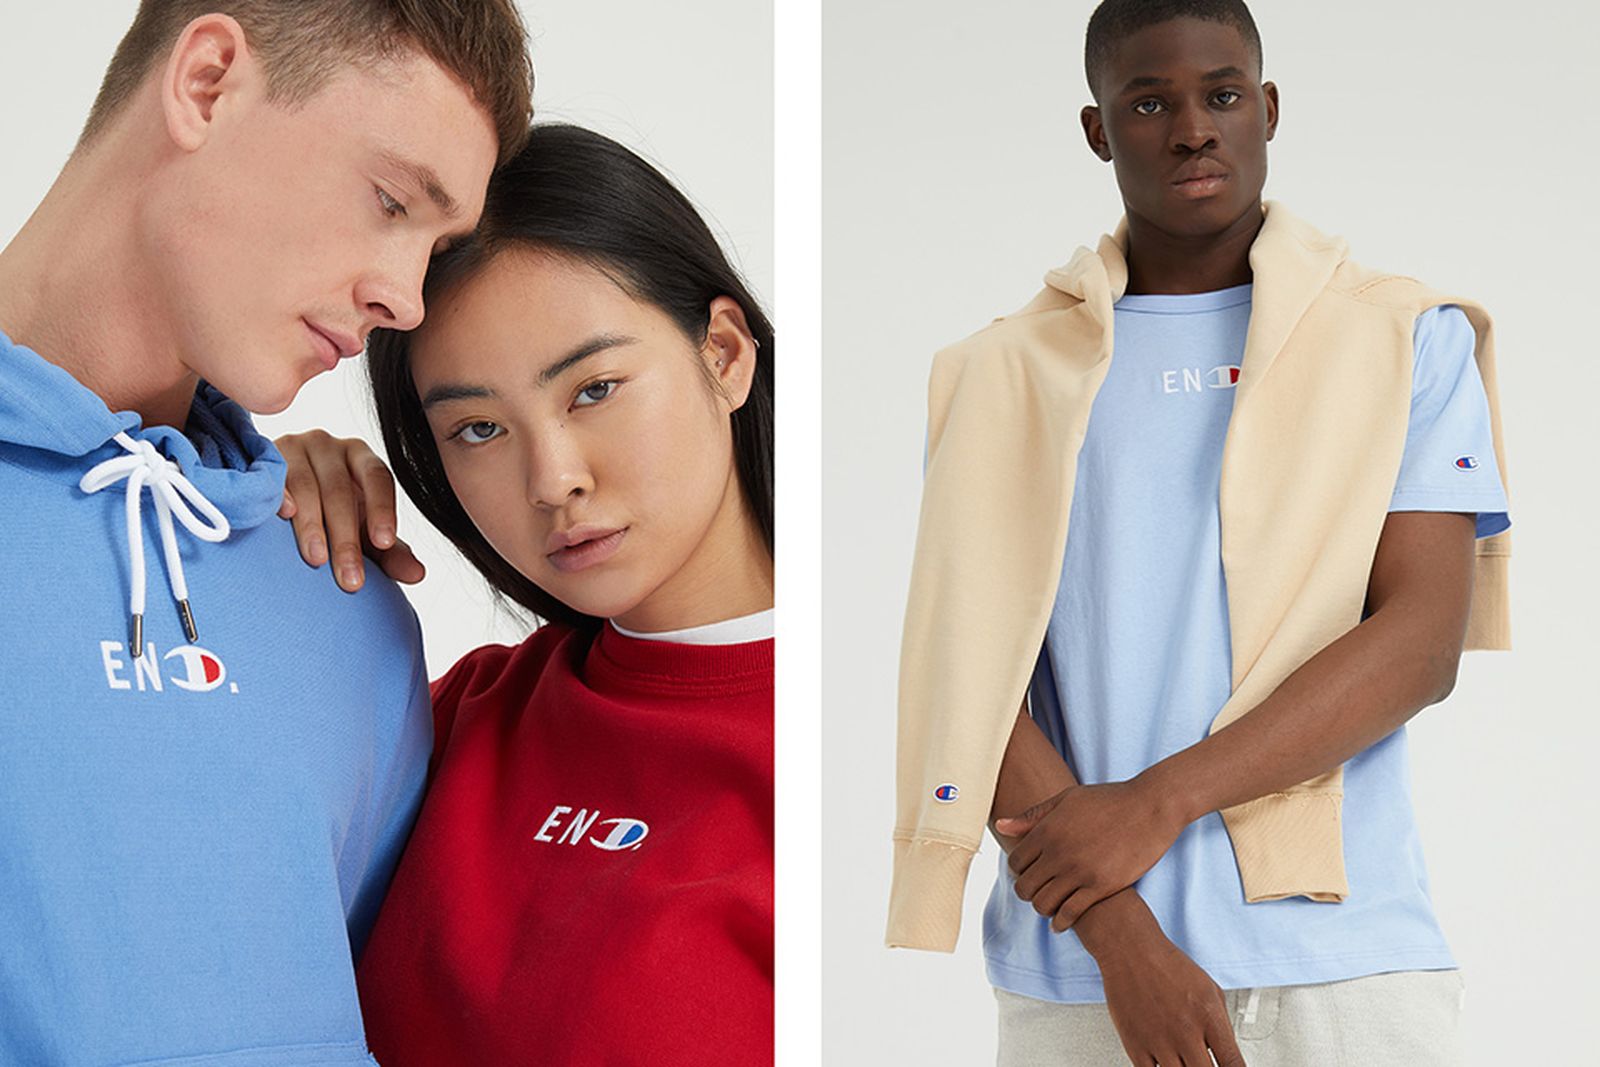 END. x SS18 Capsule: Release Date, Price & More